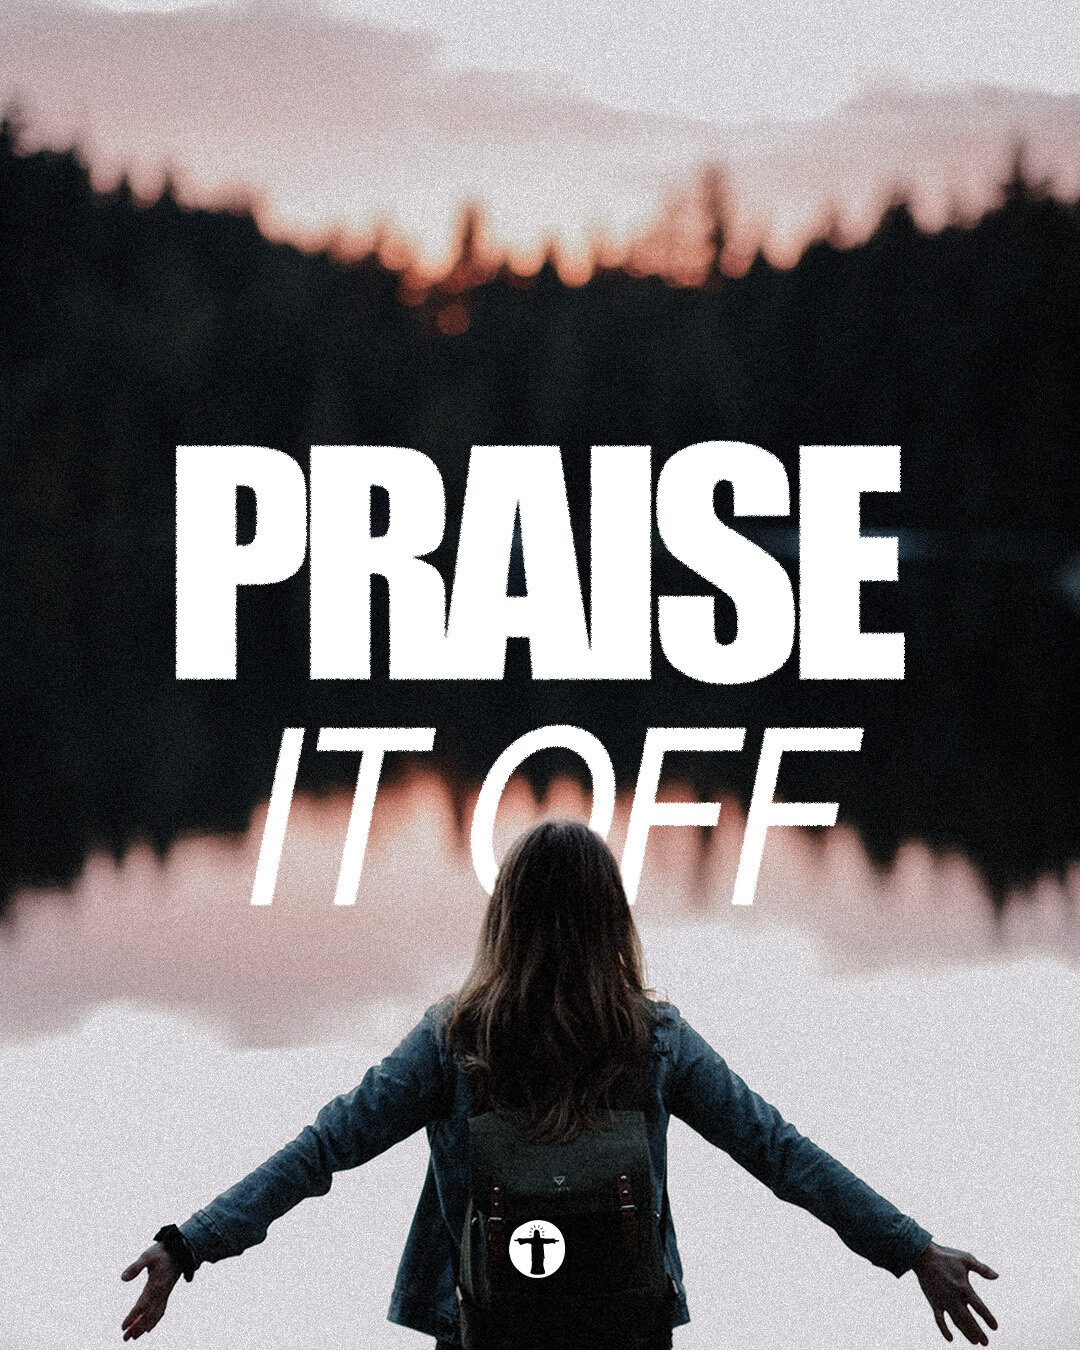 Sometimes all you have to do is PRAISE IT OFF 👋

When you praise, God fights your battles.
When you praise, God gives you a heavenly perspective.
When you praise, God confuses your enemies.
When you praise, God changes your heart.
When you praise, G